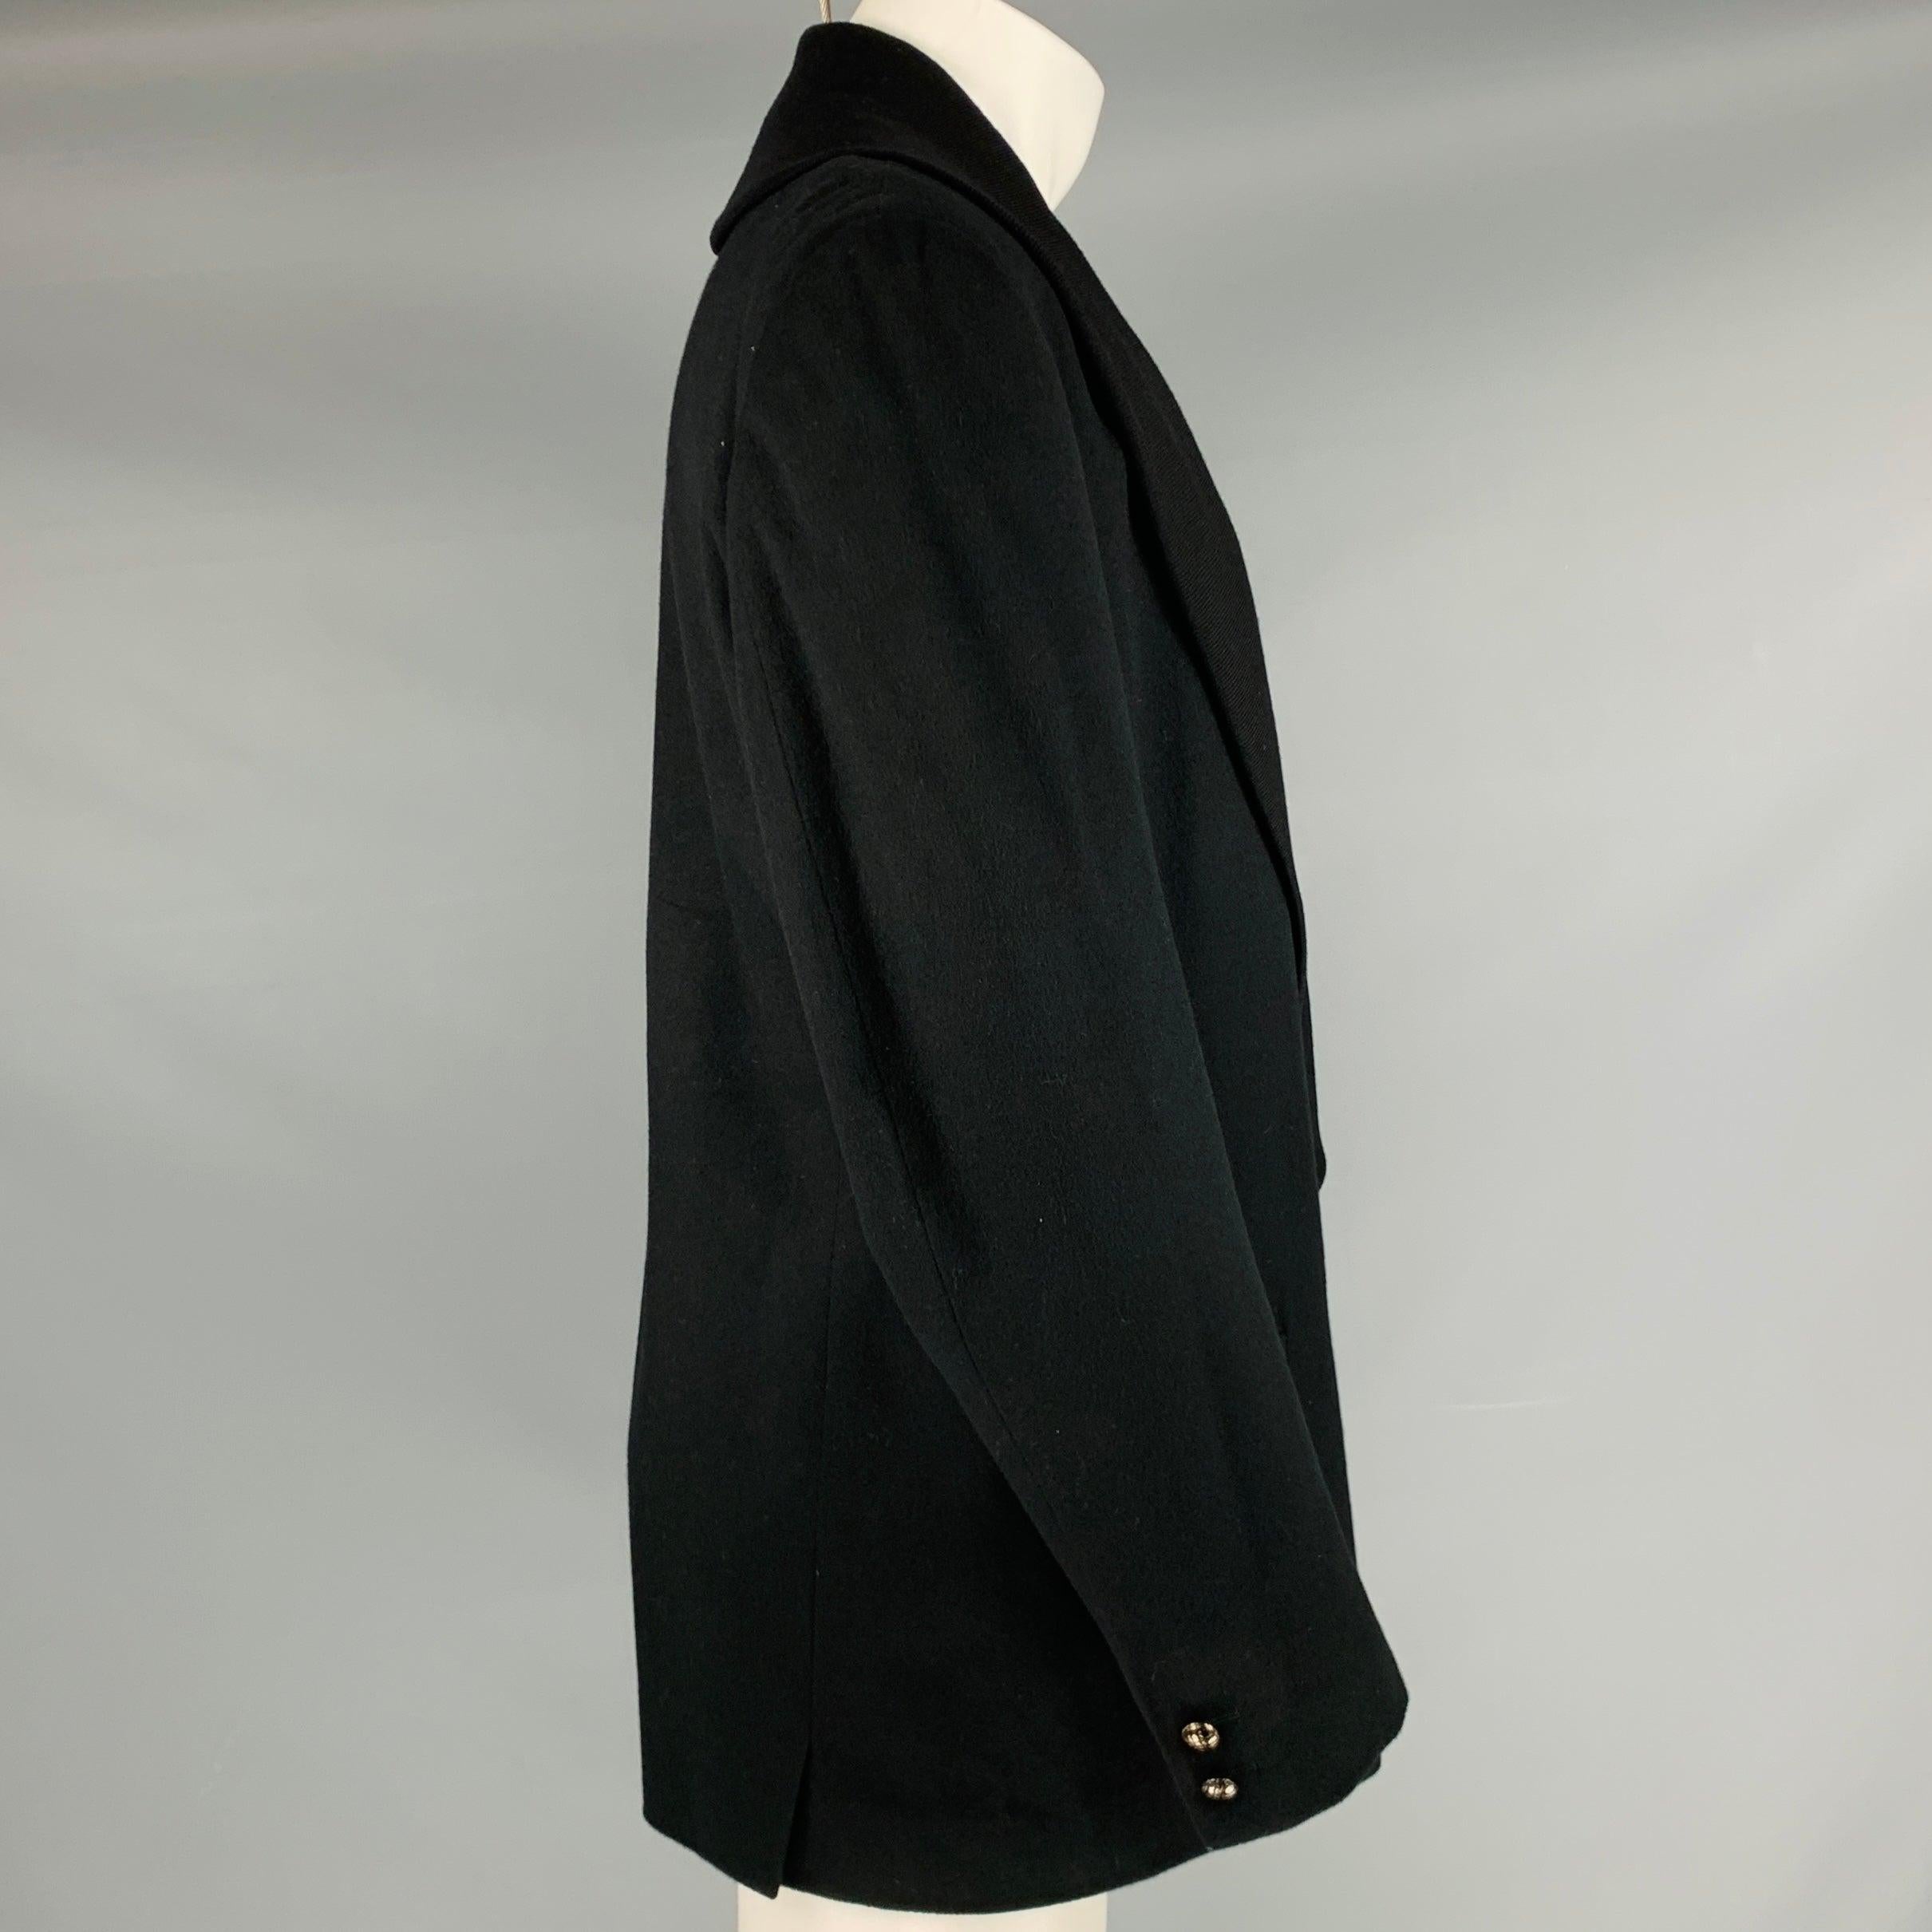 GIANNI VERSACE Size 40 Black Wool Shawl Collar Jacket In Good Condition For Sale In San Francisco, CA